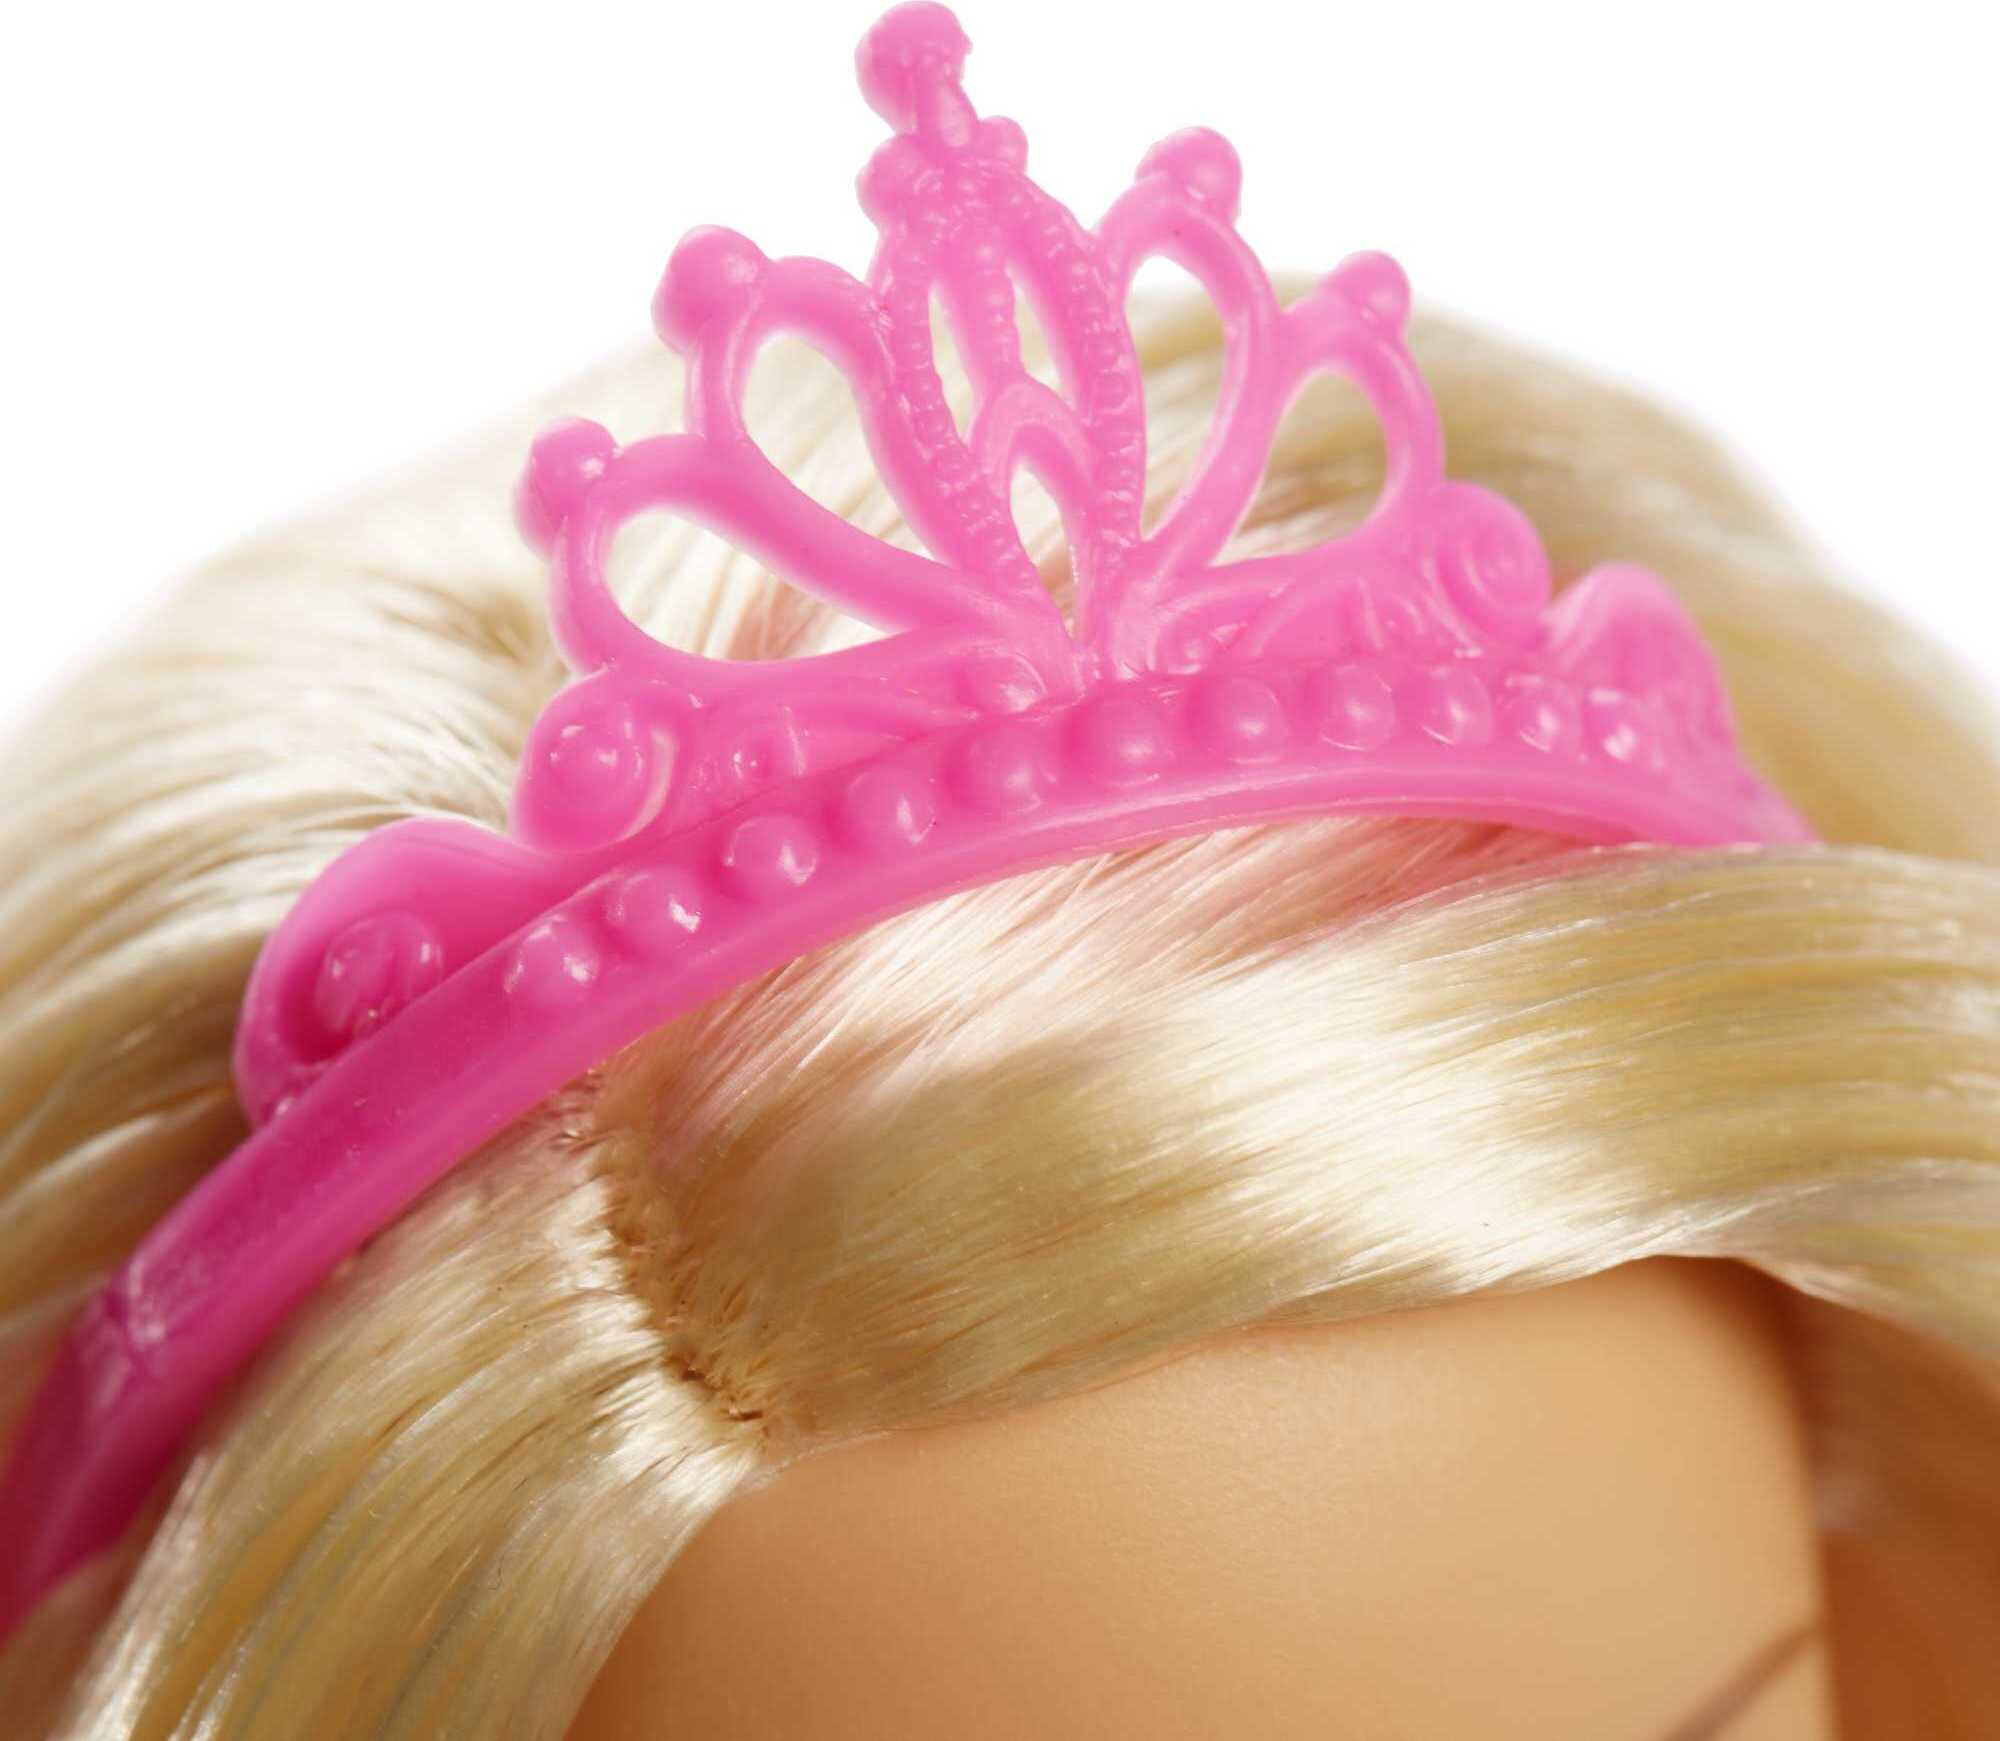 Barbie Dreamtopia Royal Doll with Blonde Hair, Shimmery Pink Skirt & Headband Accessory - image 3 of 4